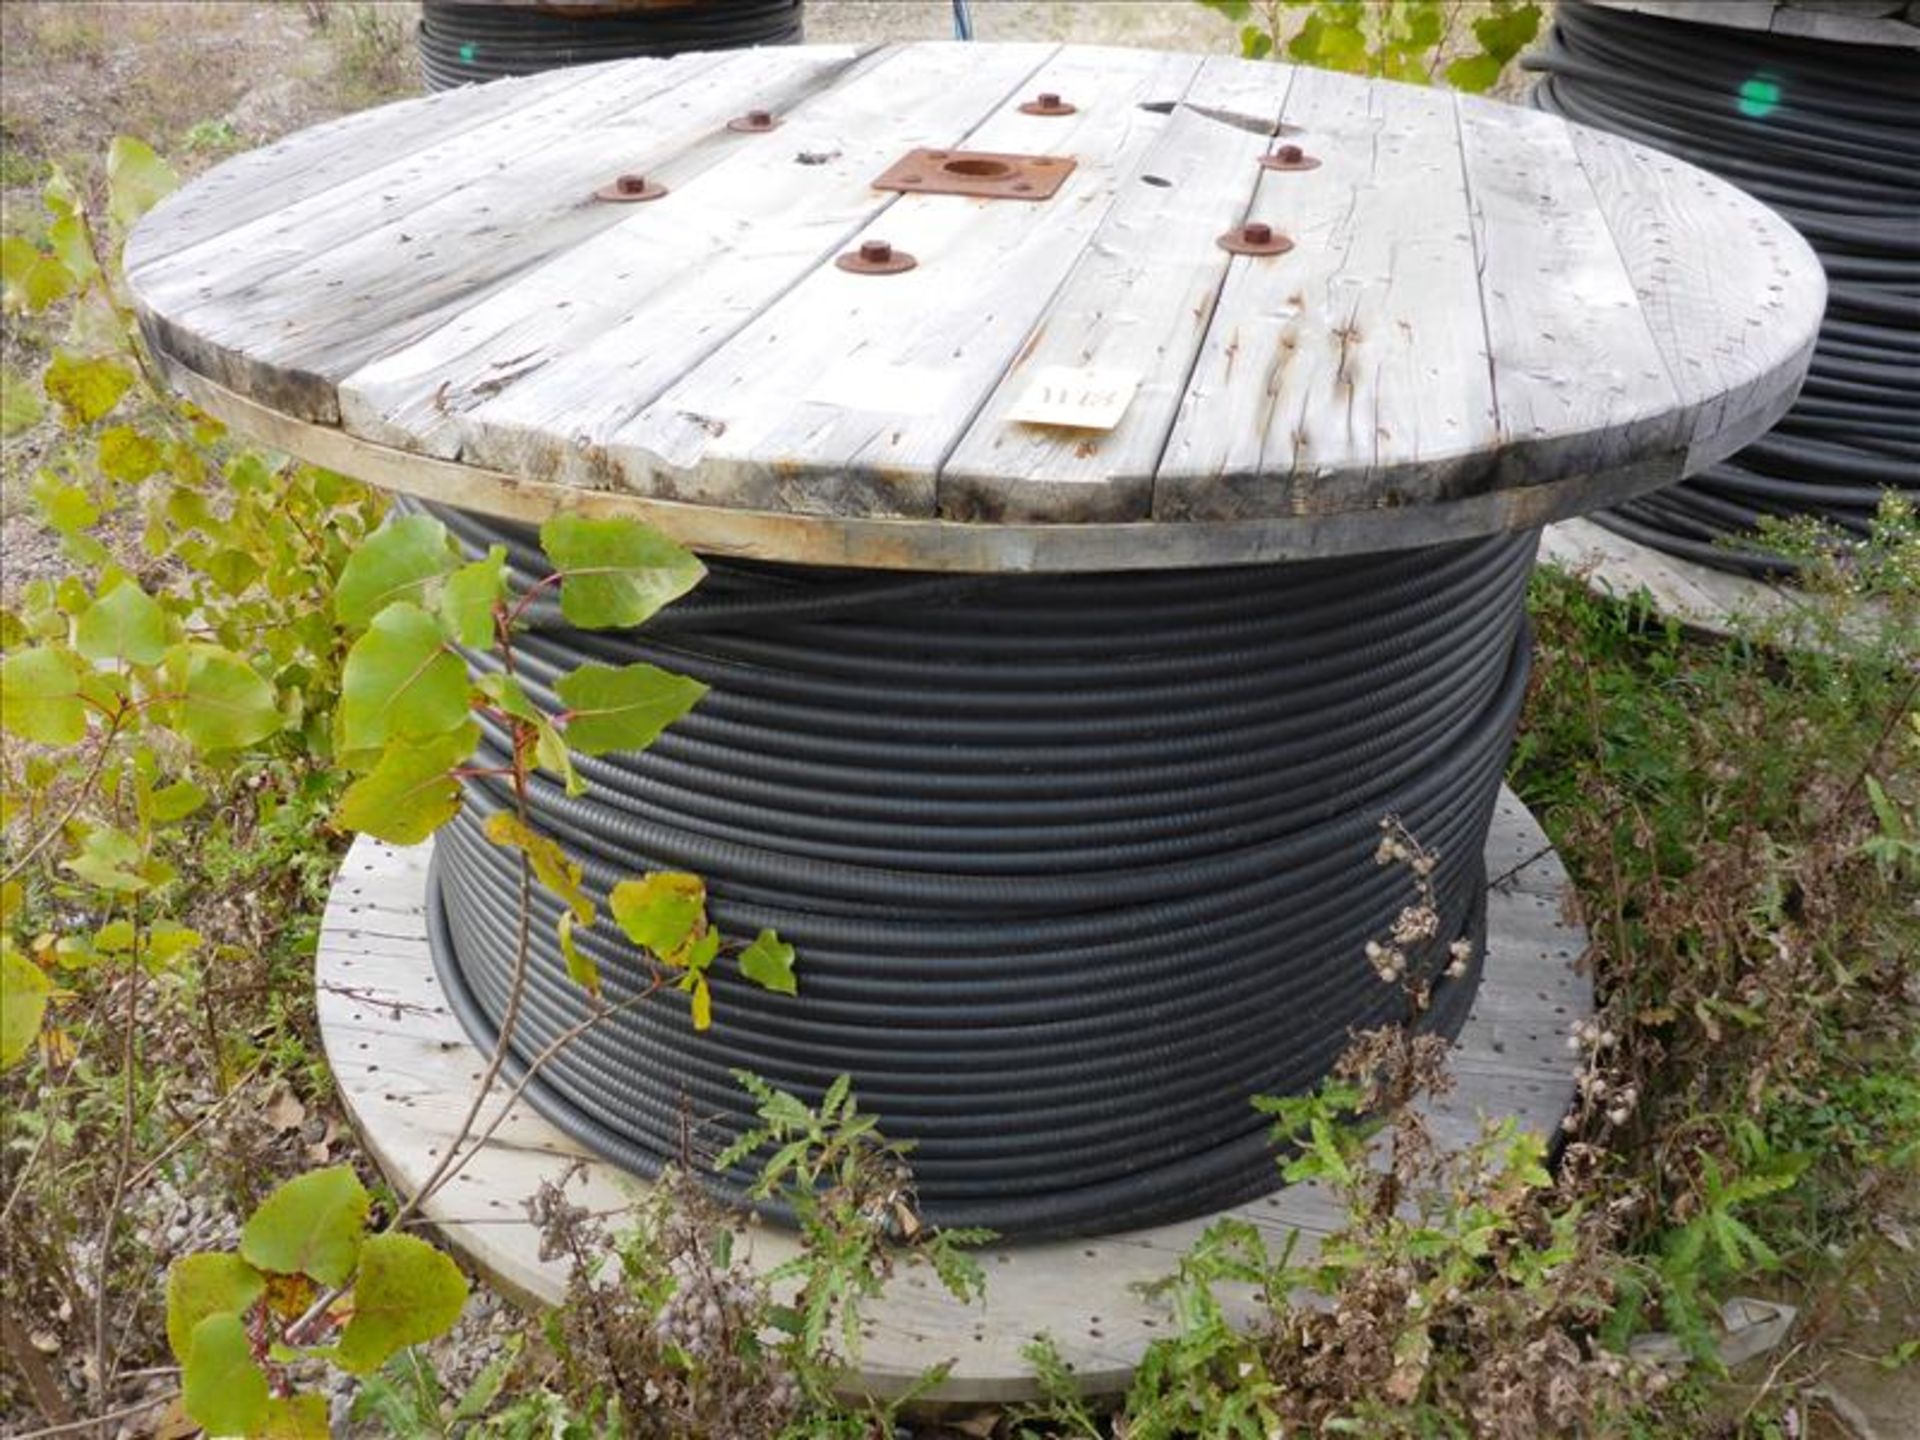 reel of electrical cable, approx.1,900 ft., 00999 M -I- Aug. 2013 Nexans Firex -II 14 AWG/20C Teck